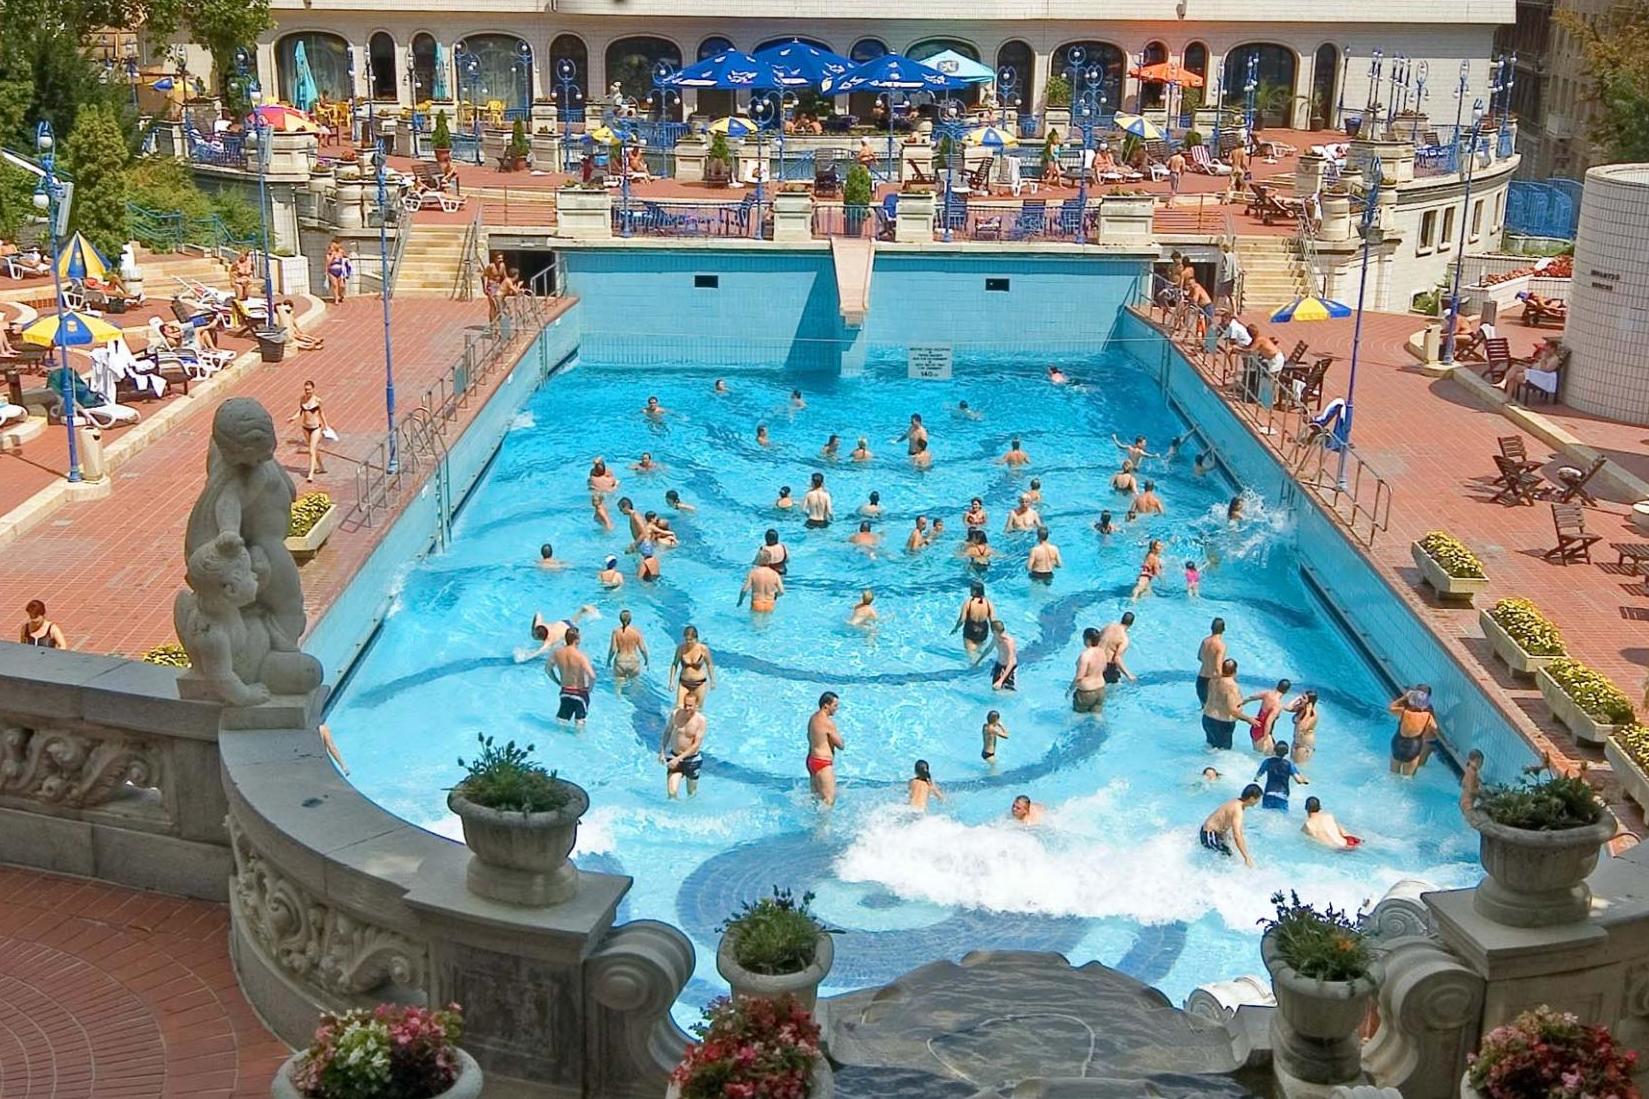 Budapest is known for its outdoor pools